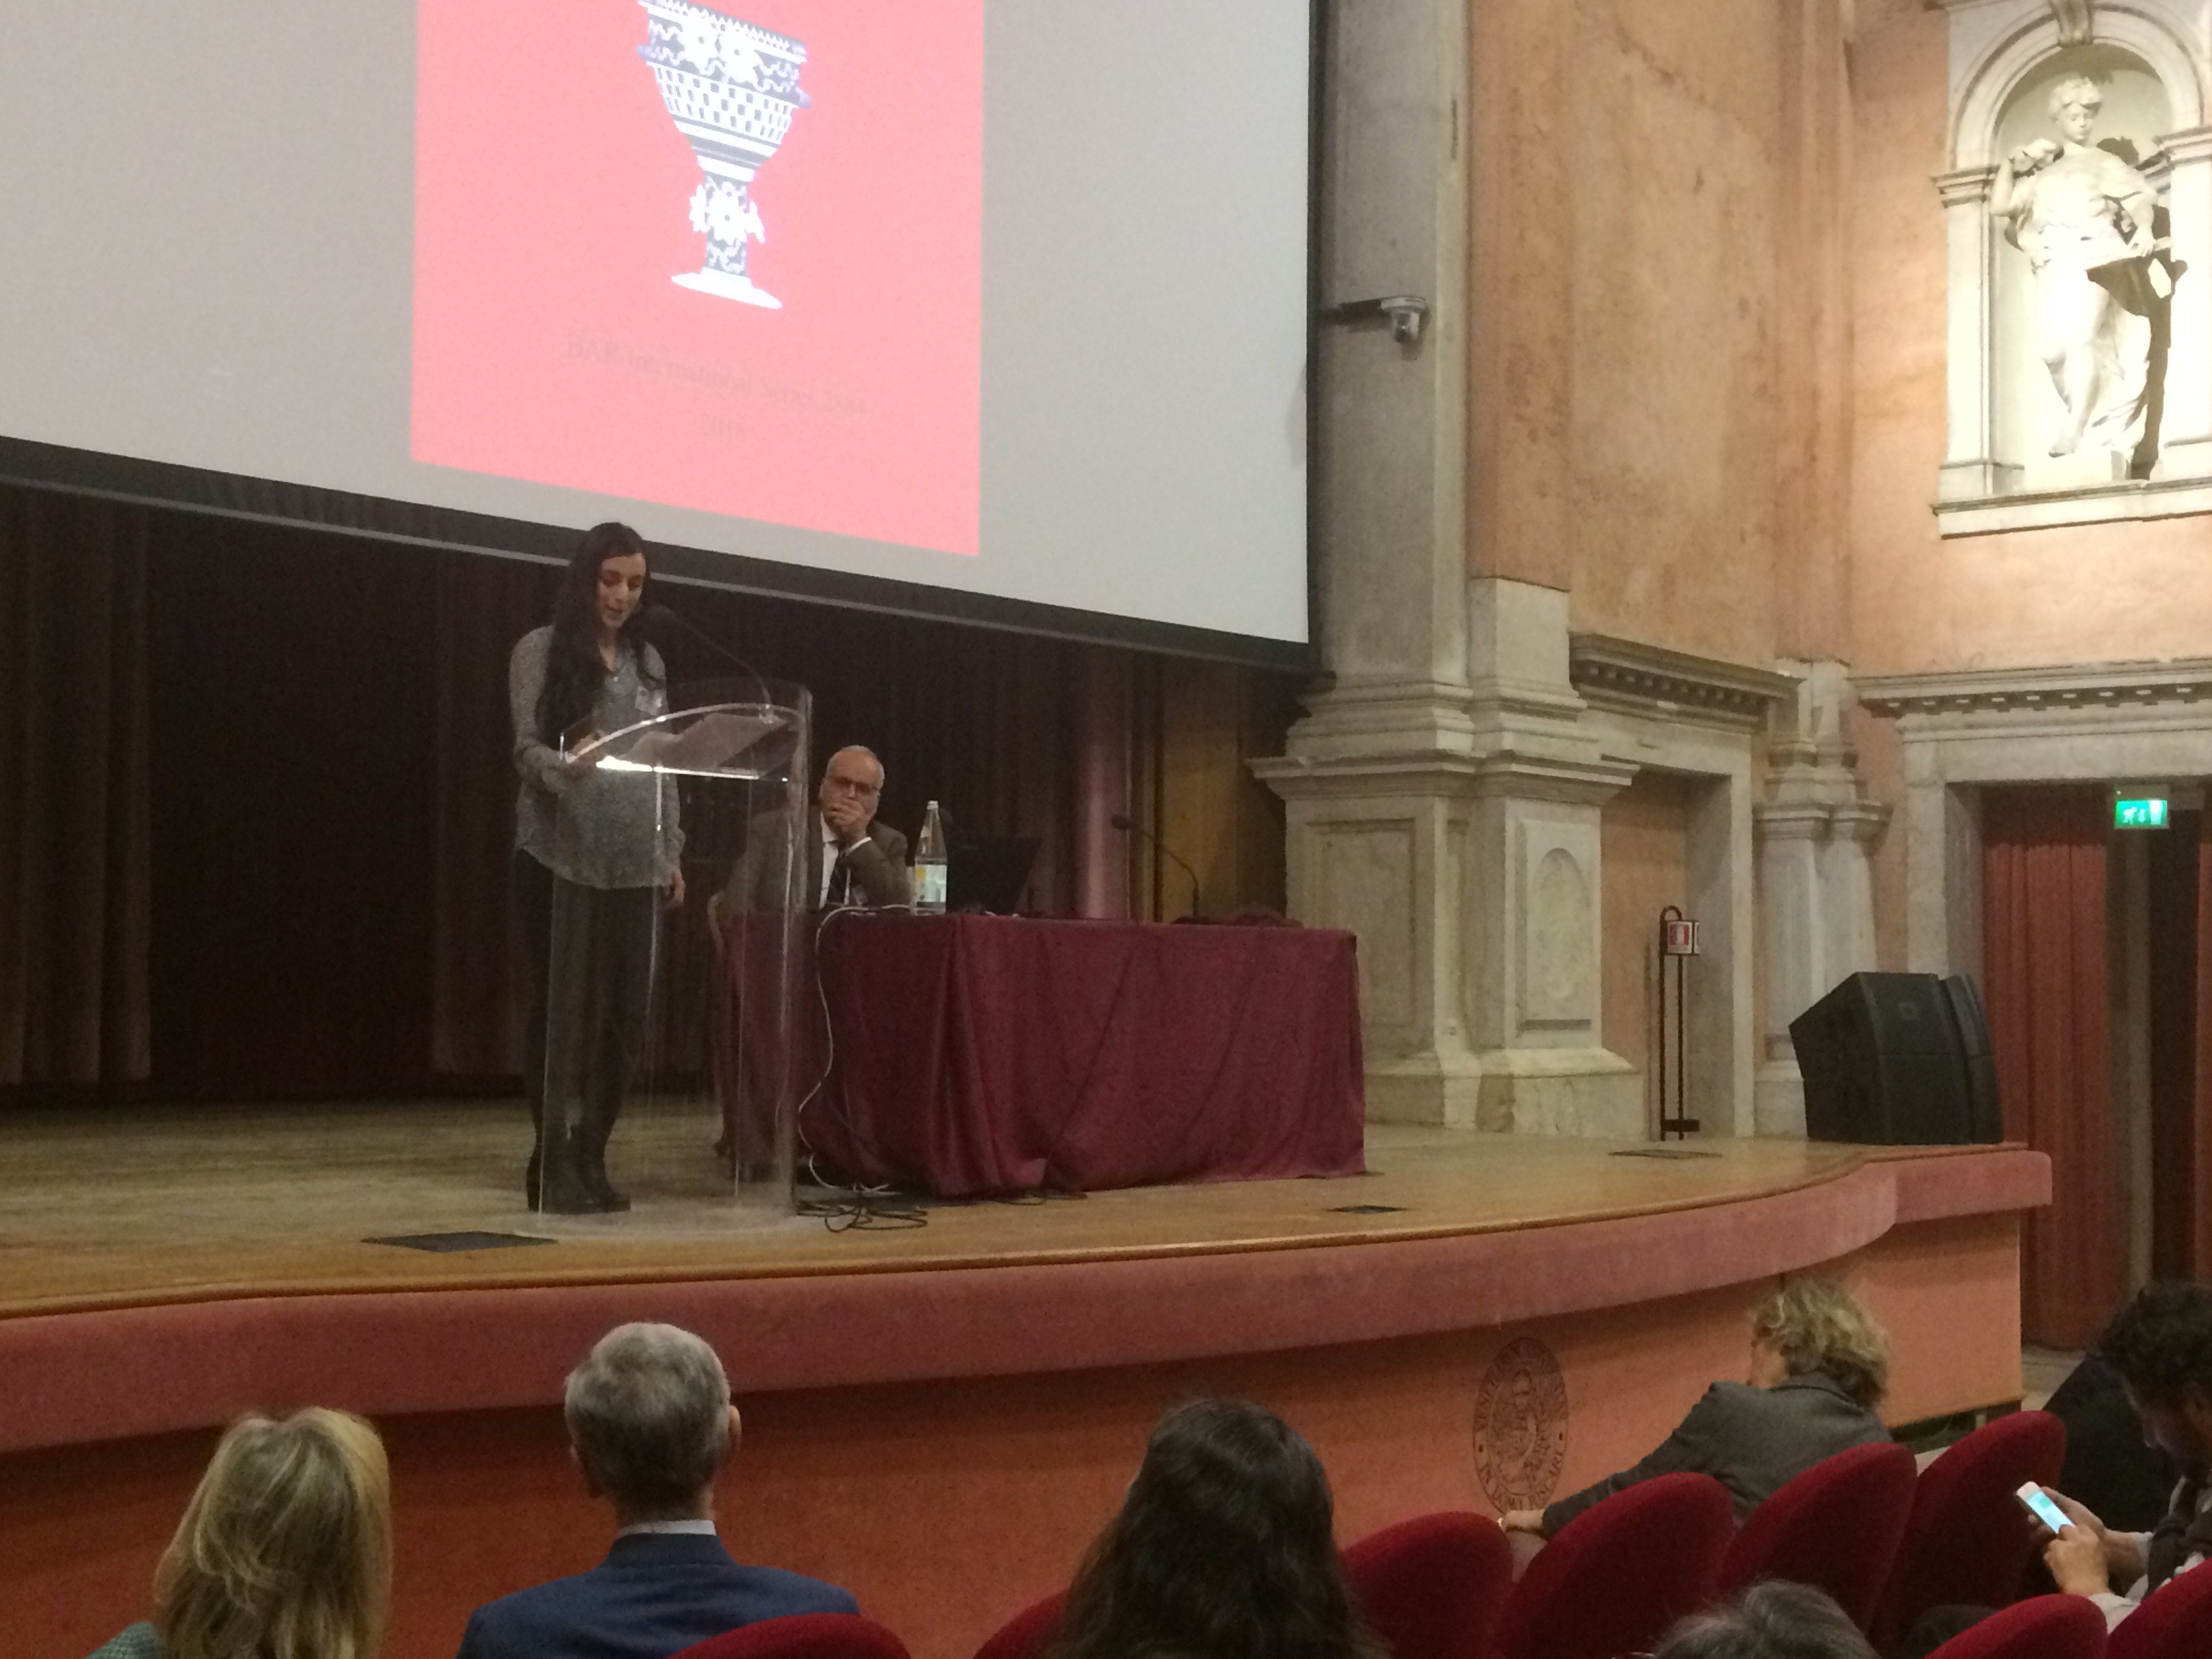 Giorgia Baldacci is reading a message on behalf of the volume editors